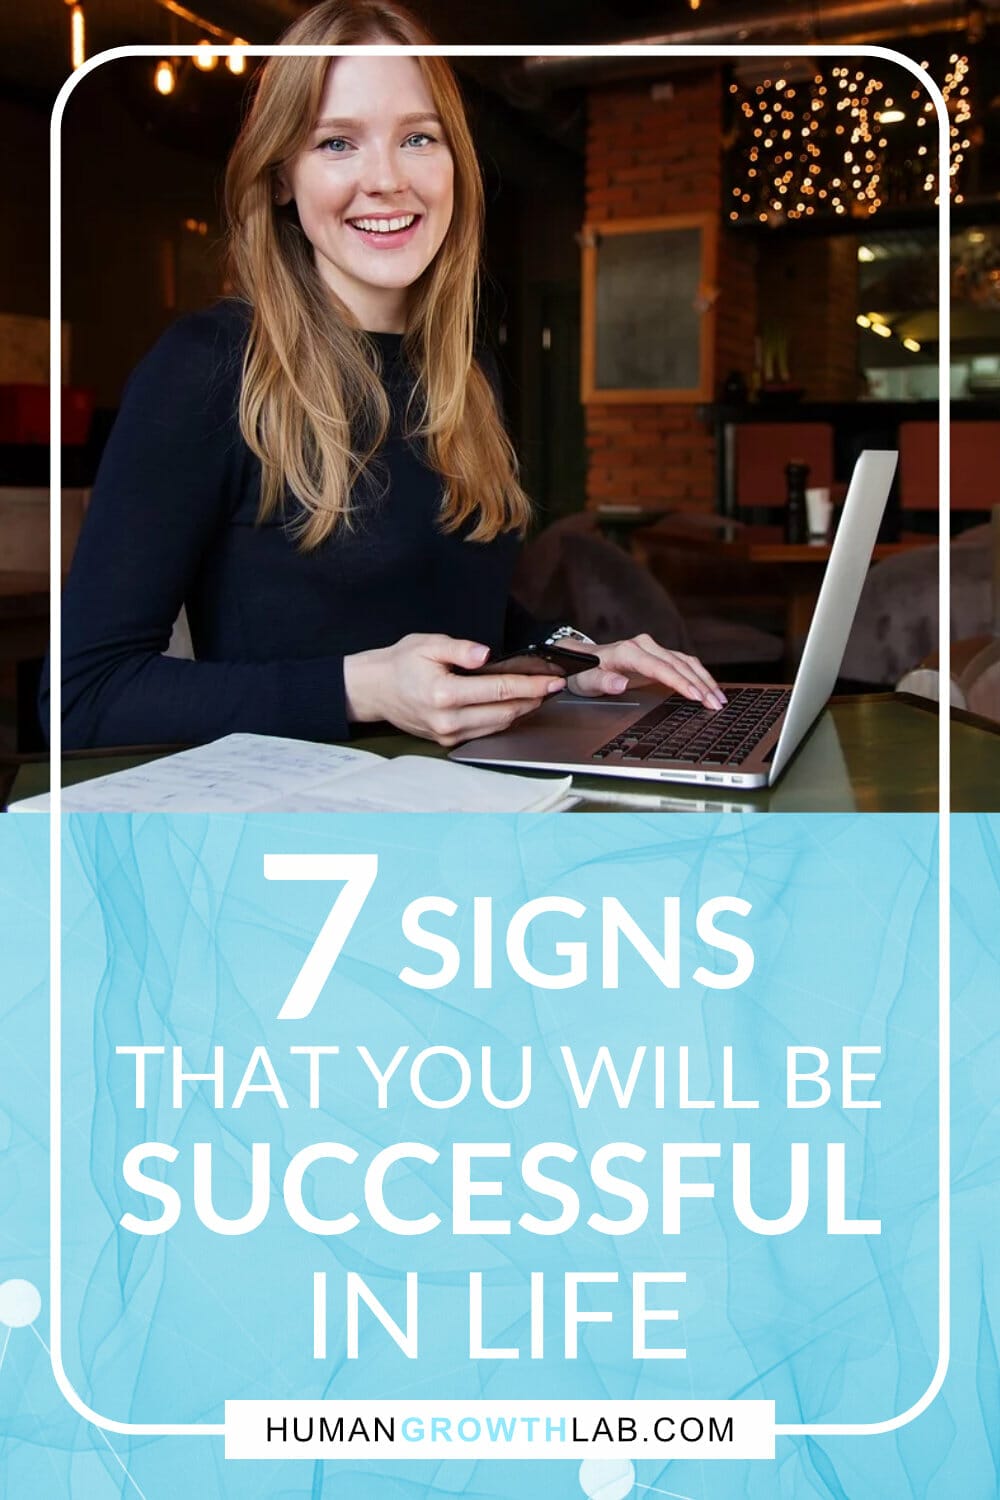 Signs of Success Pinterest image